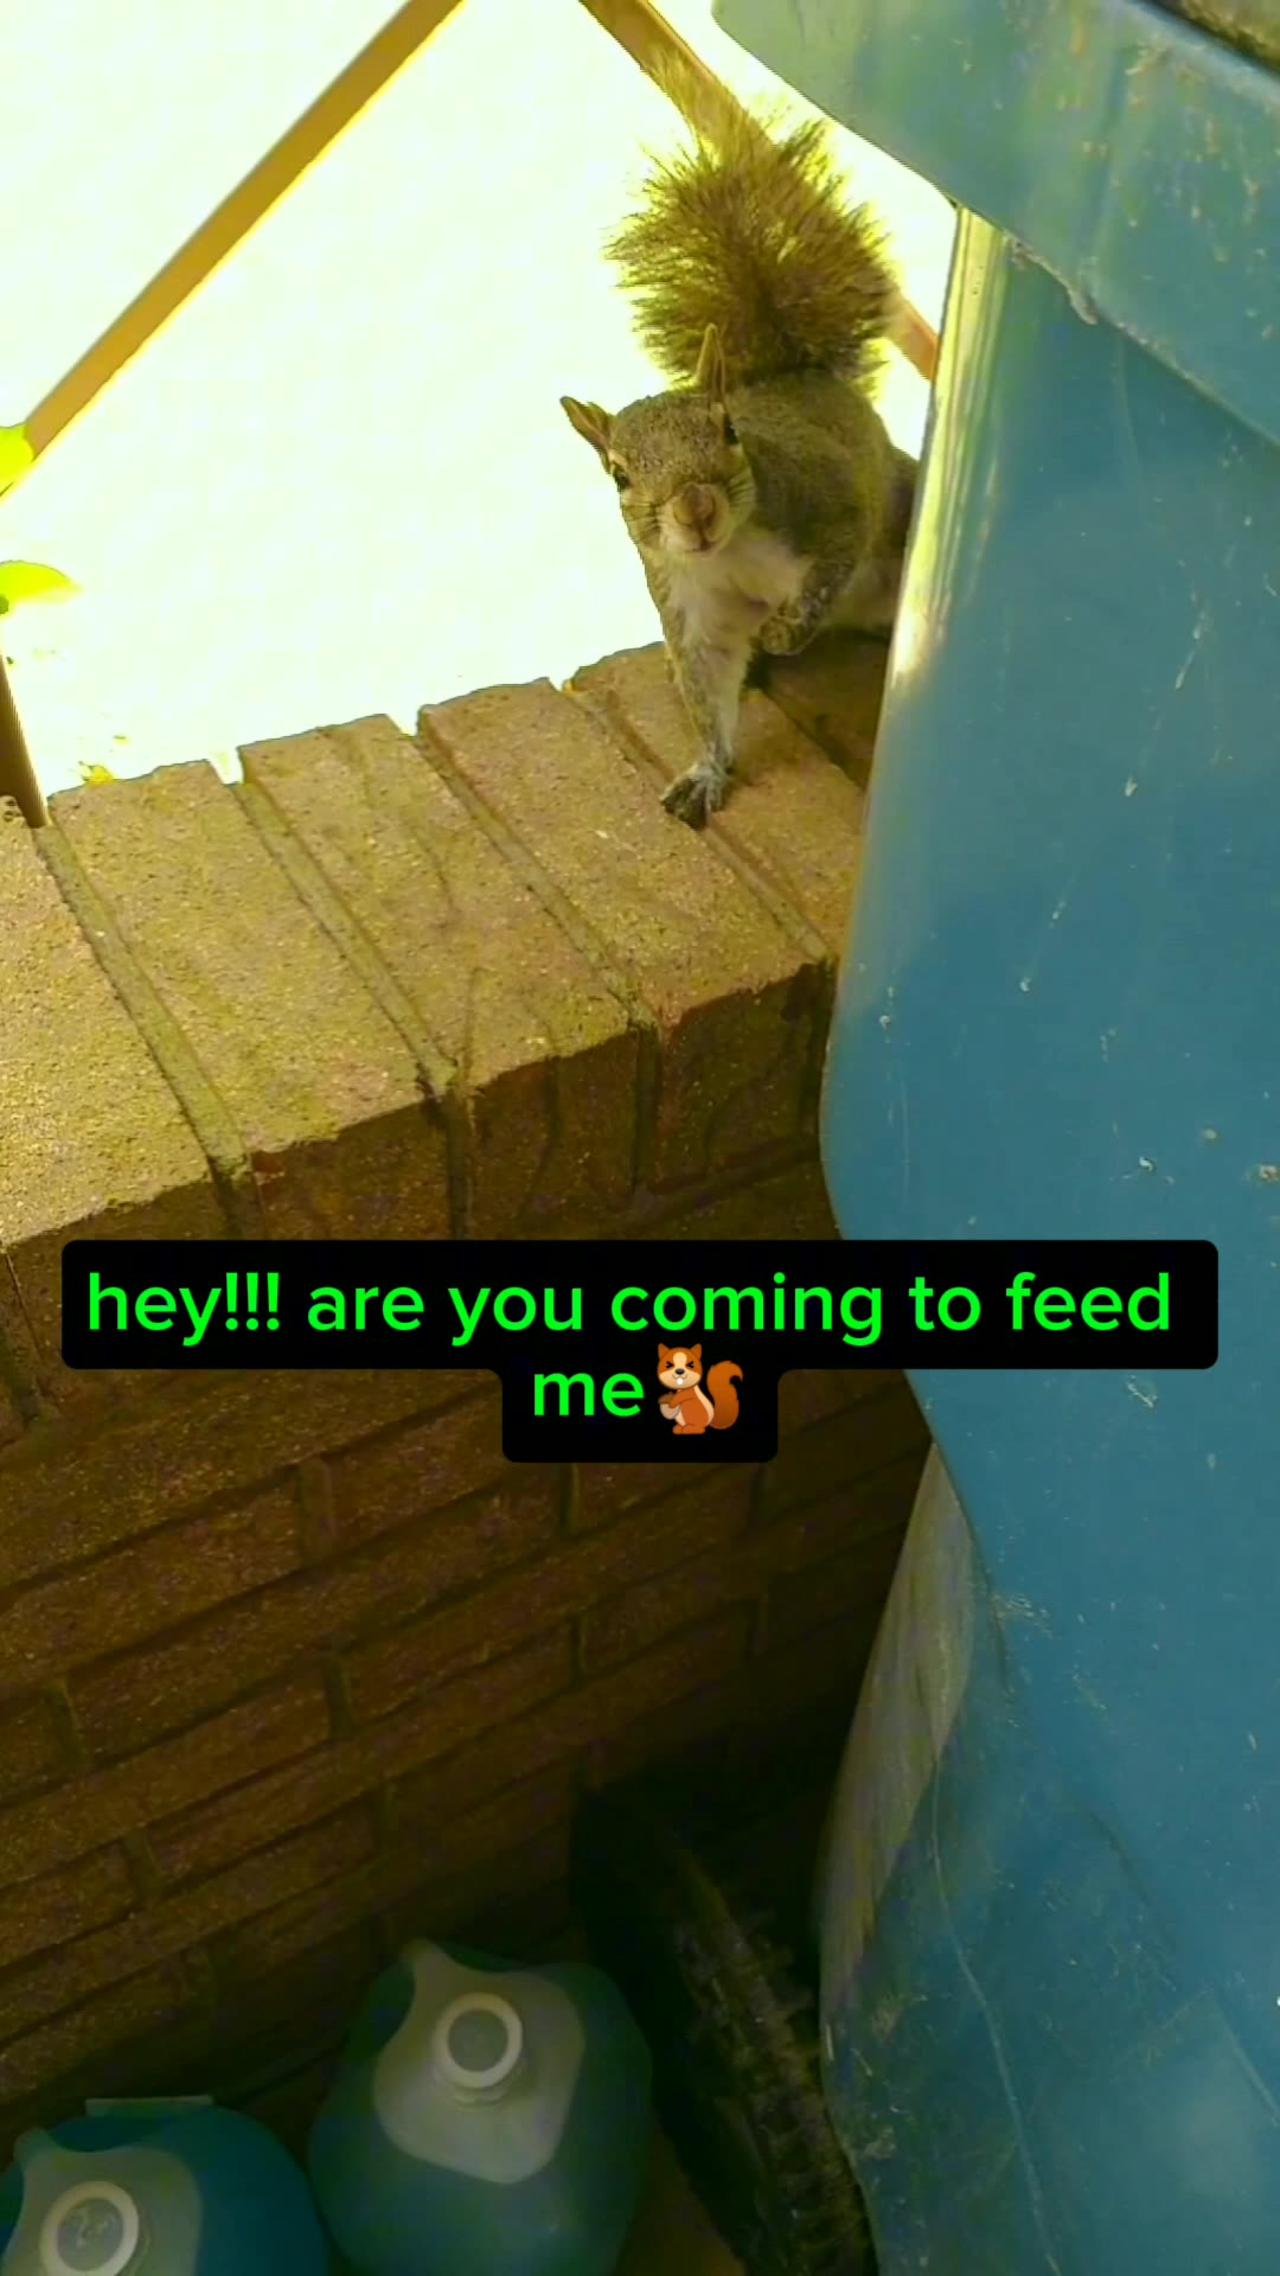 Funny squirrel 🤣🤣🤣🐿️ peeked back at me behind the dumpster!!!